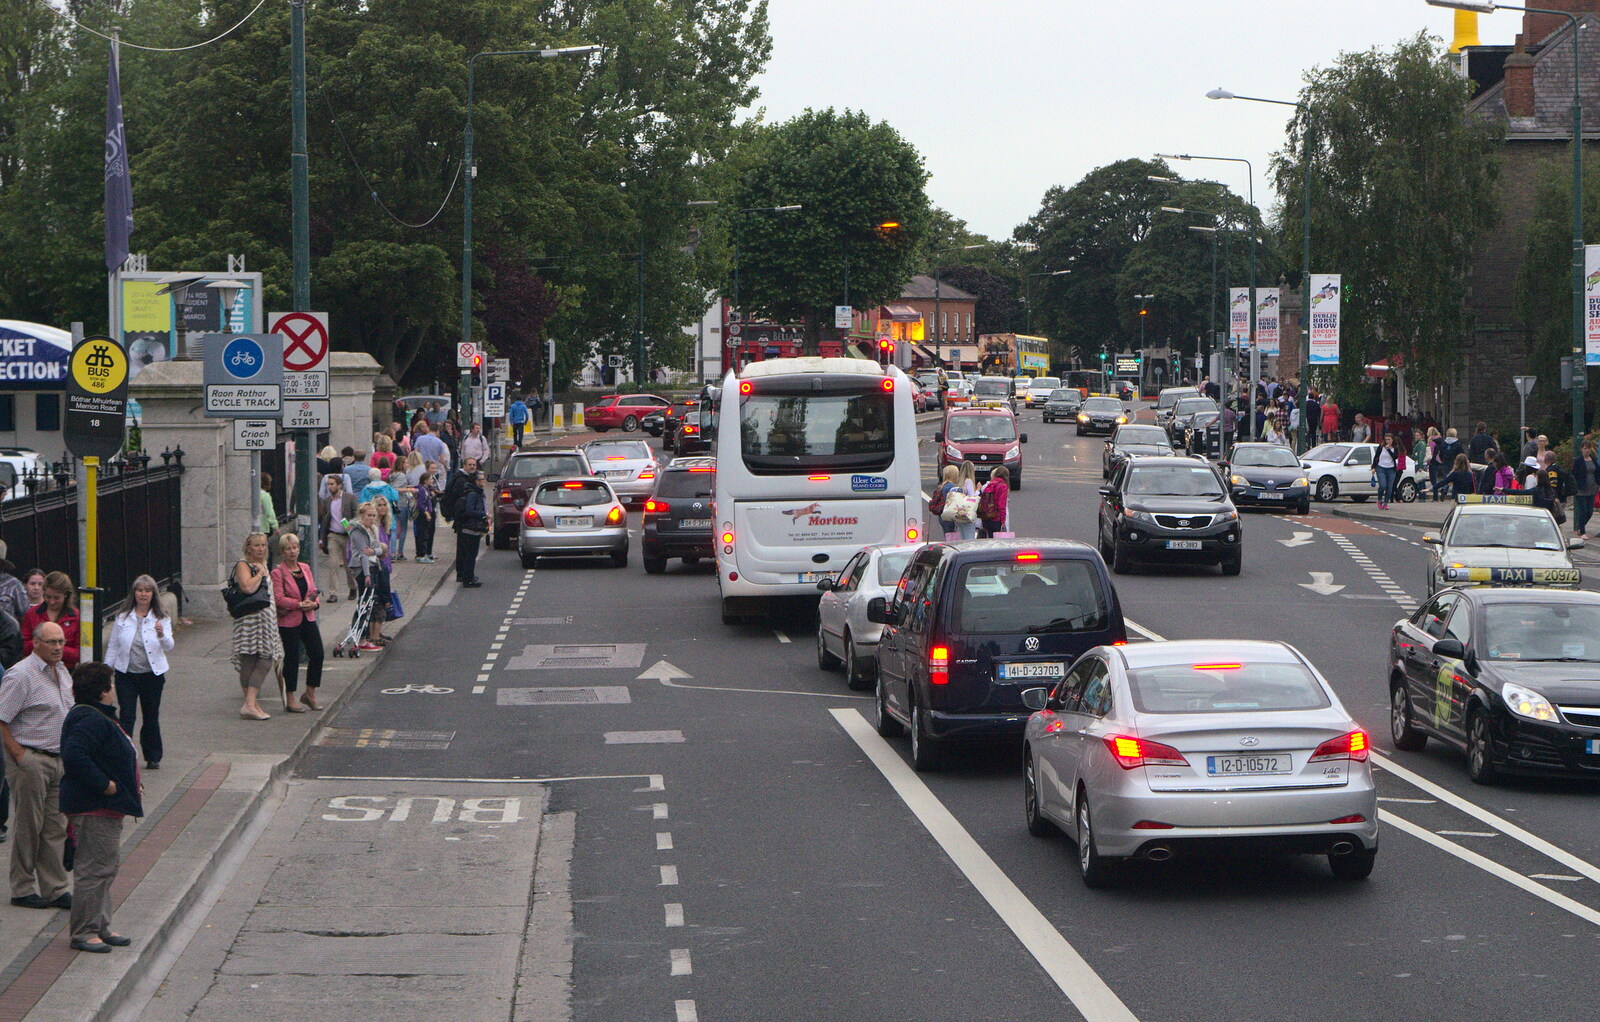 Merrion Road and the horse show crowds from A Night Out in Dublin, County Dublin, Ireland - 9th August 2014